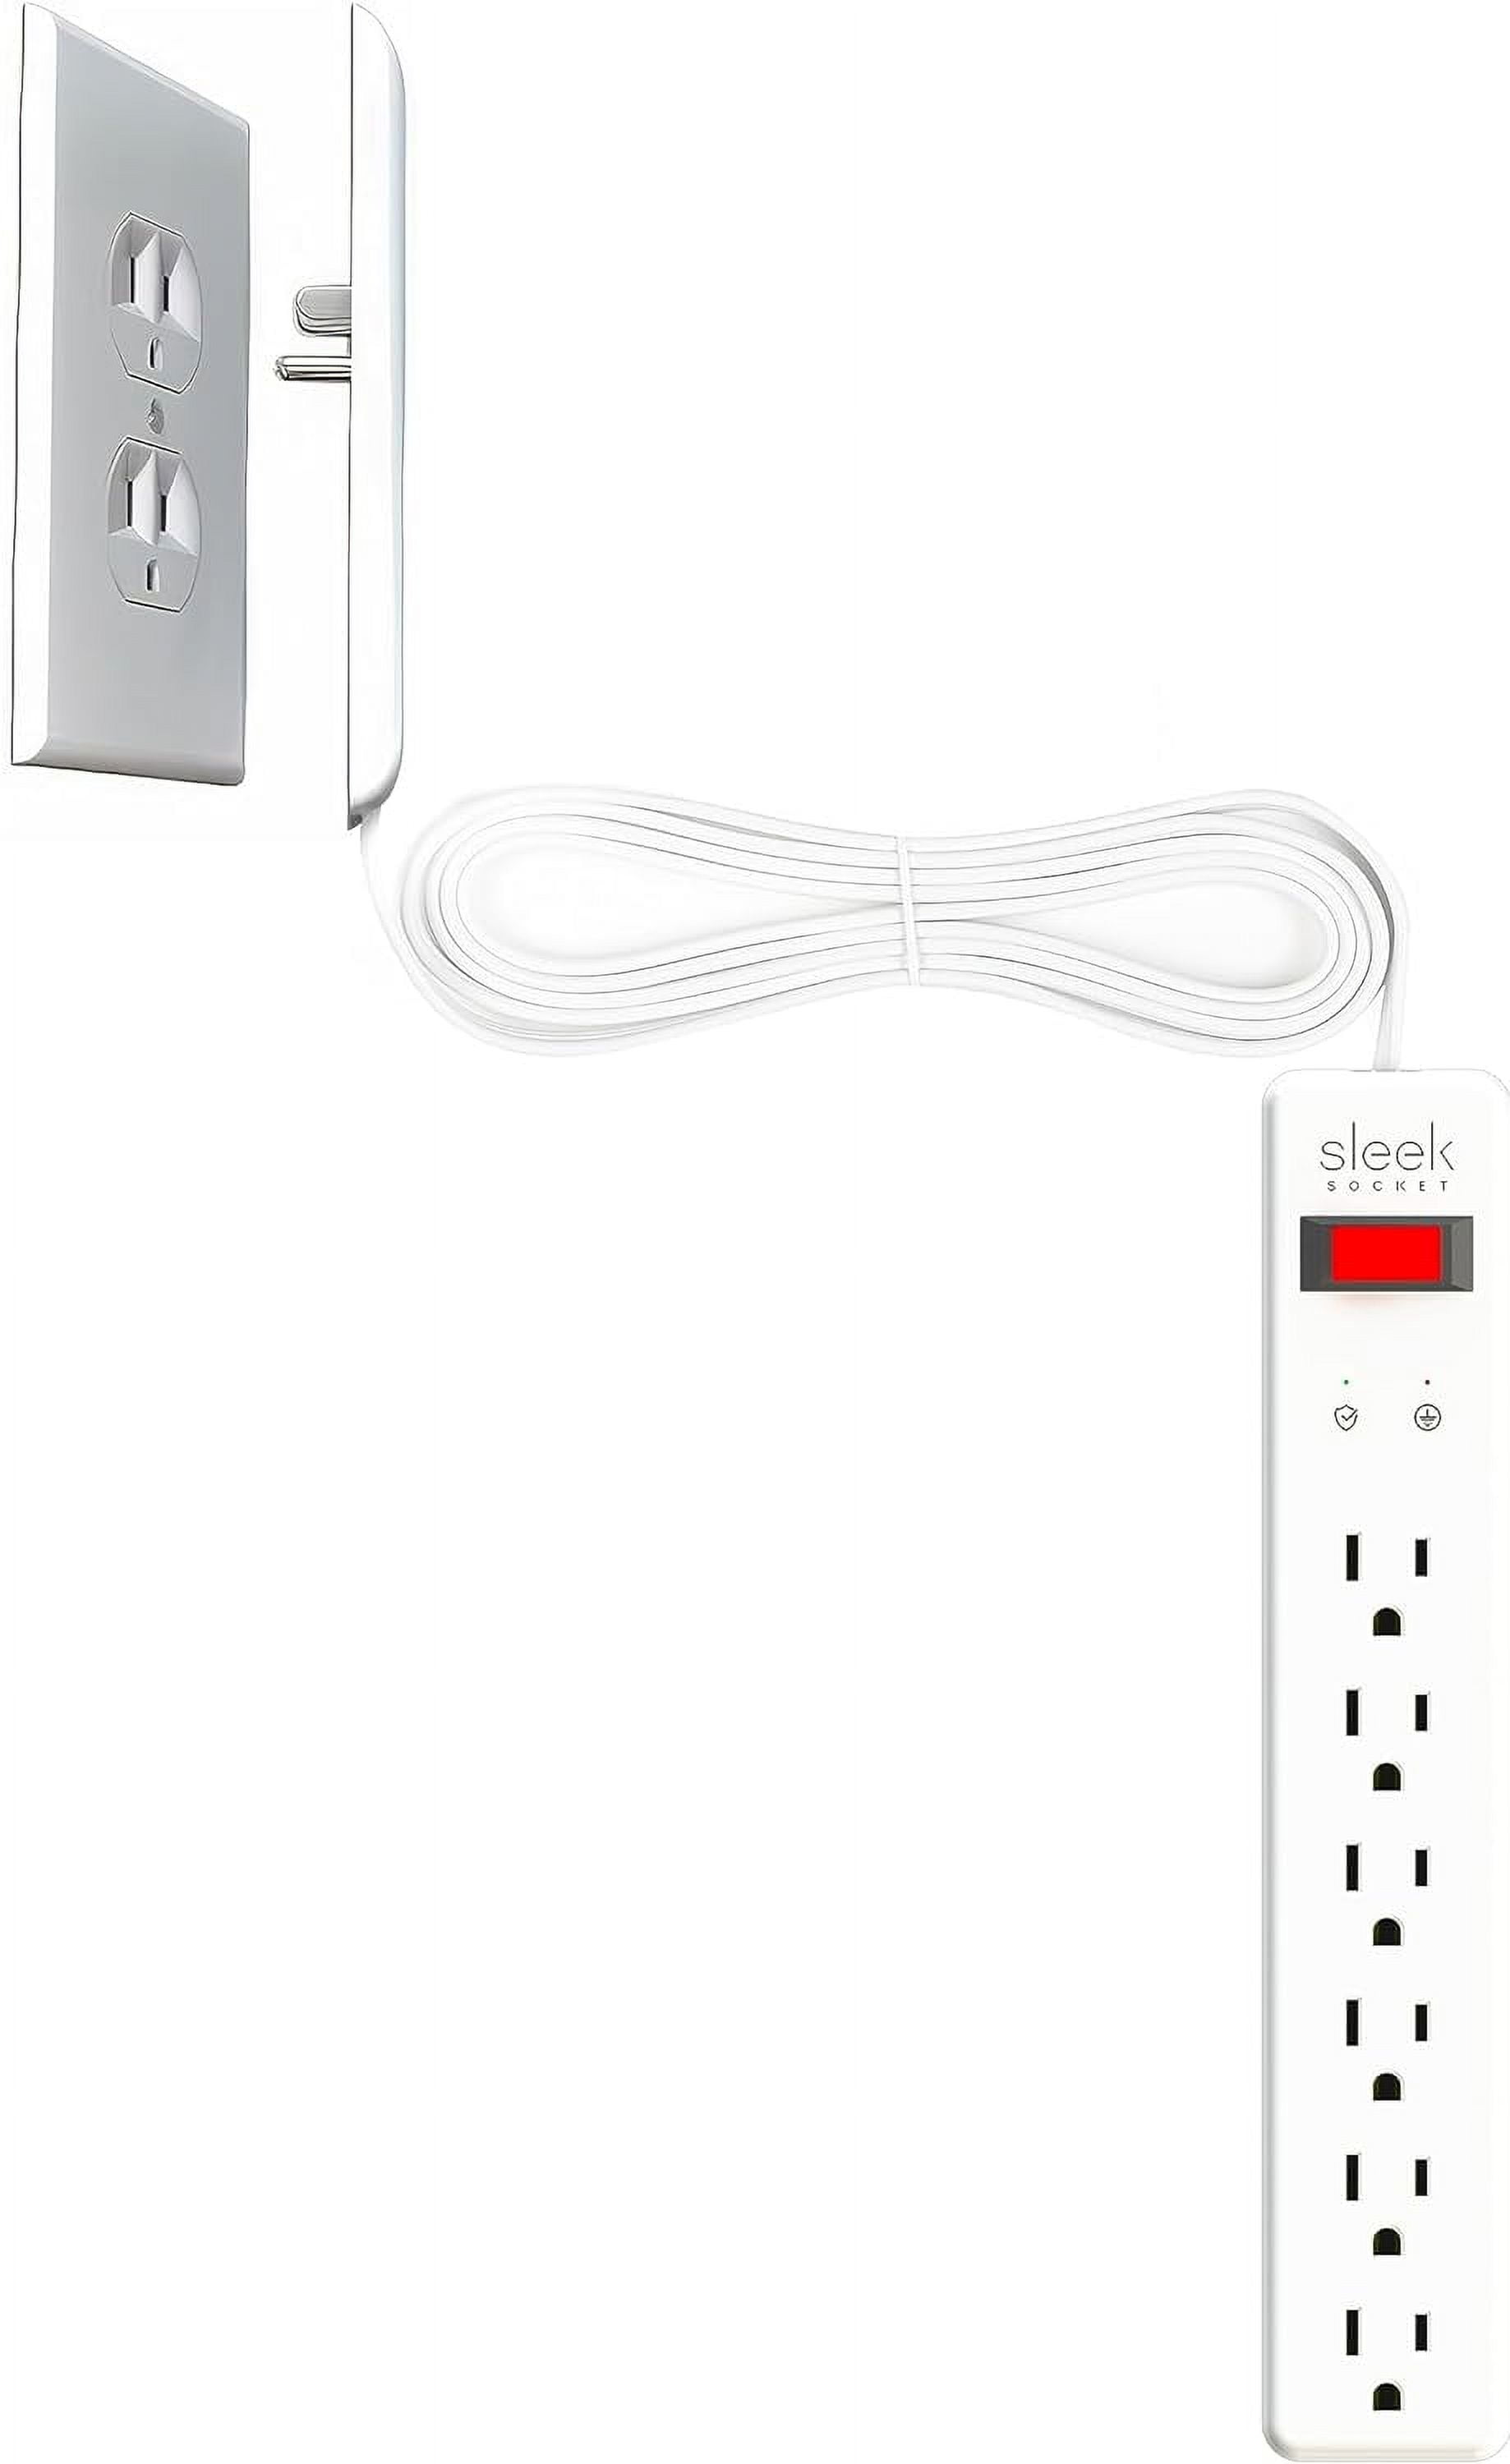 Sleek Socket Ultra-Thin Child Proofing Electrical Outlet Cover with 3  Outlet Power Strip and Protective Cord Cover Kit, 8-Foot, Universal Size 8  ft, Universal